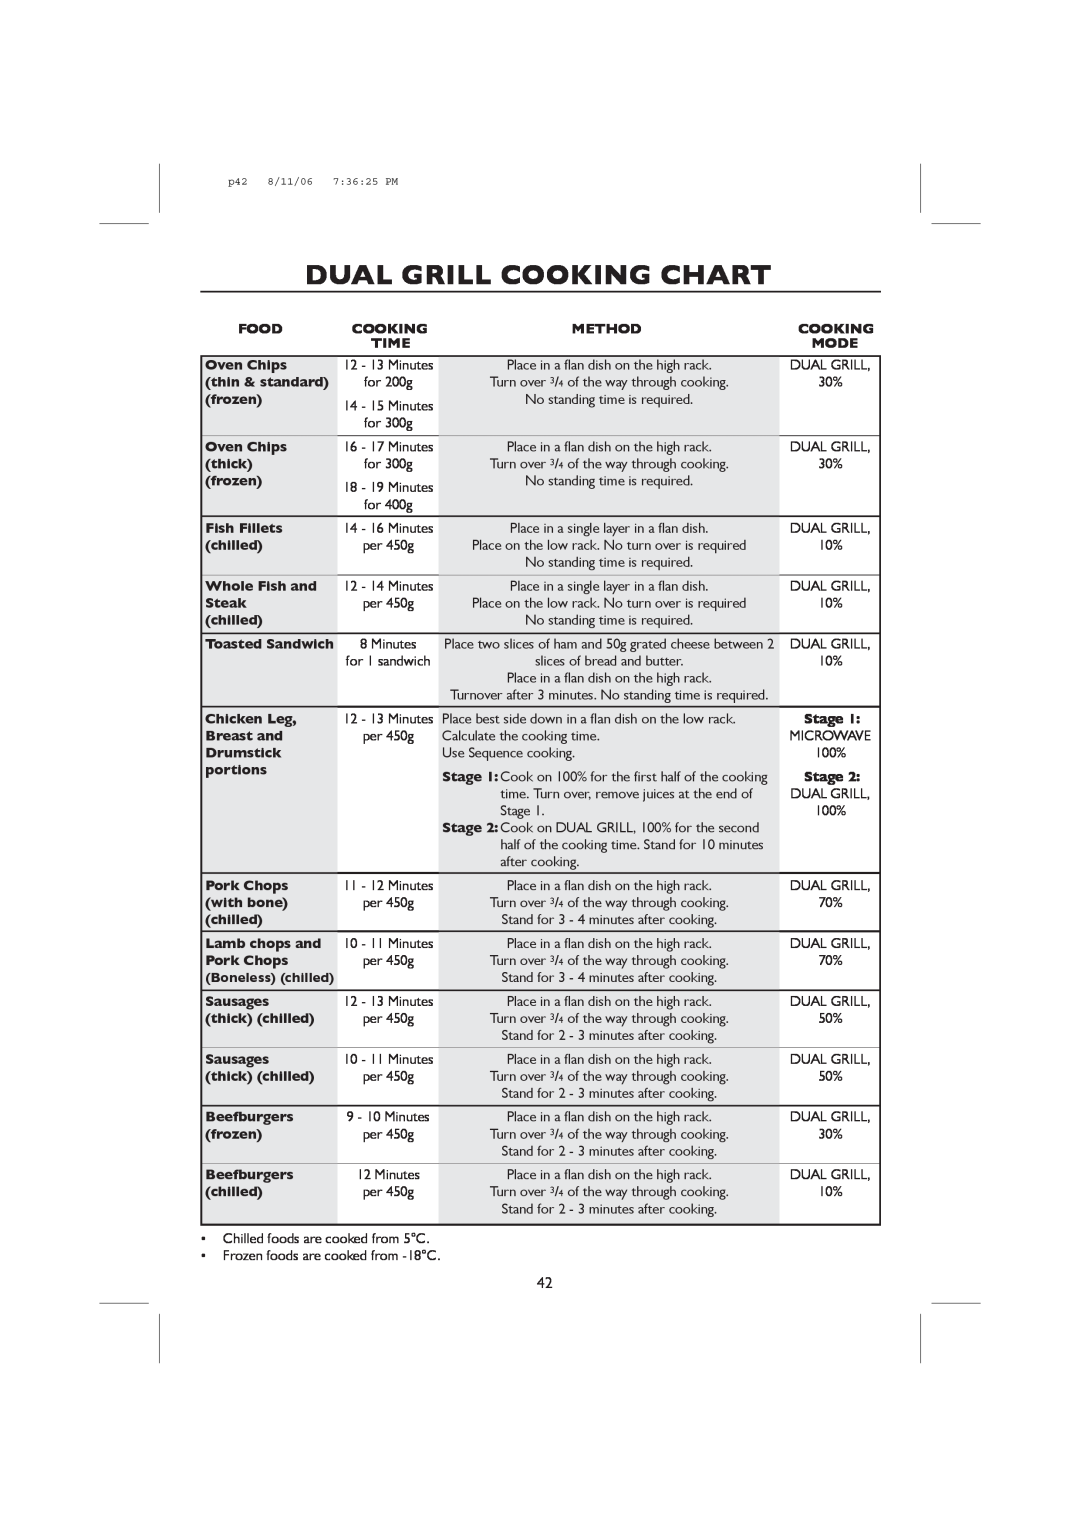 Sharp R-98STM-A, R-959M operation manual Dual Grill Cooking Chart, p42 8/11/06 73625 PM 